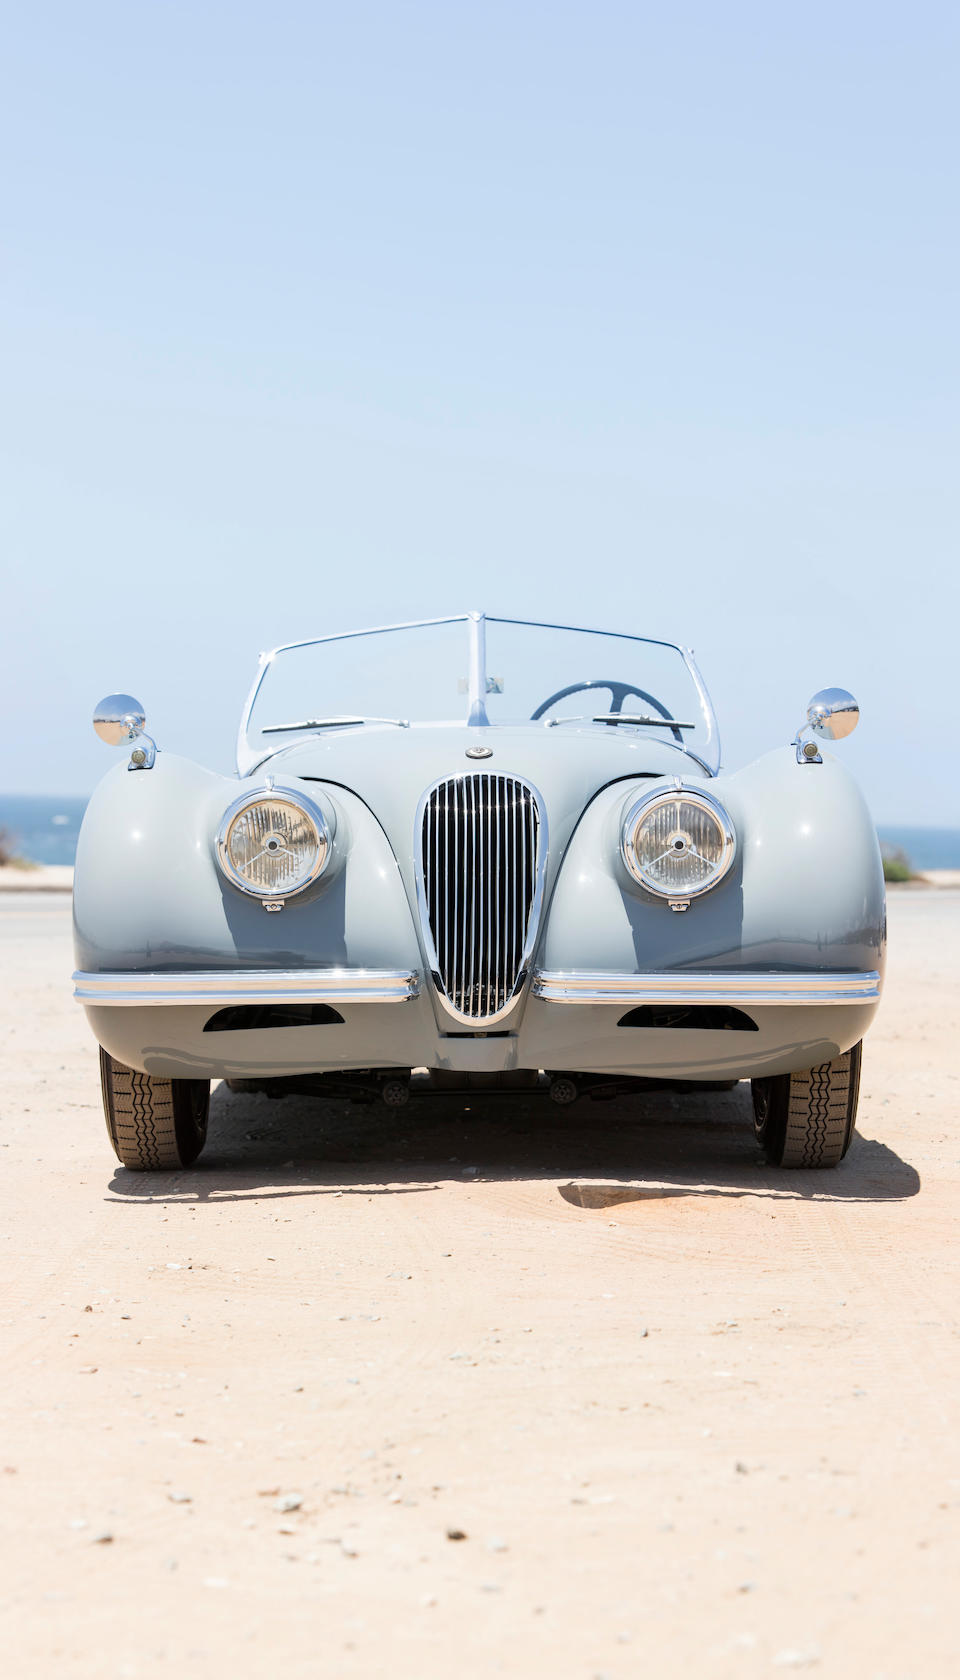 <b>1951 Jaguar XK120 Roadster</b><br />Chassis no. 671514<br />Engine no. F6761-8 (see text)